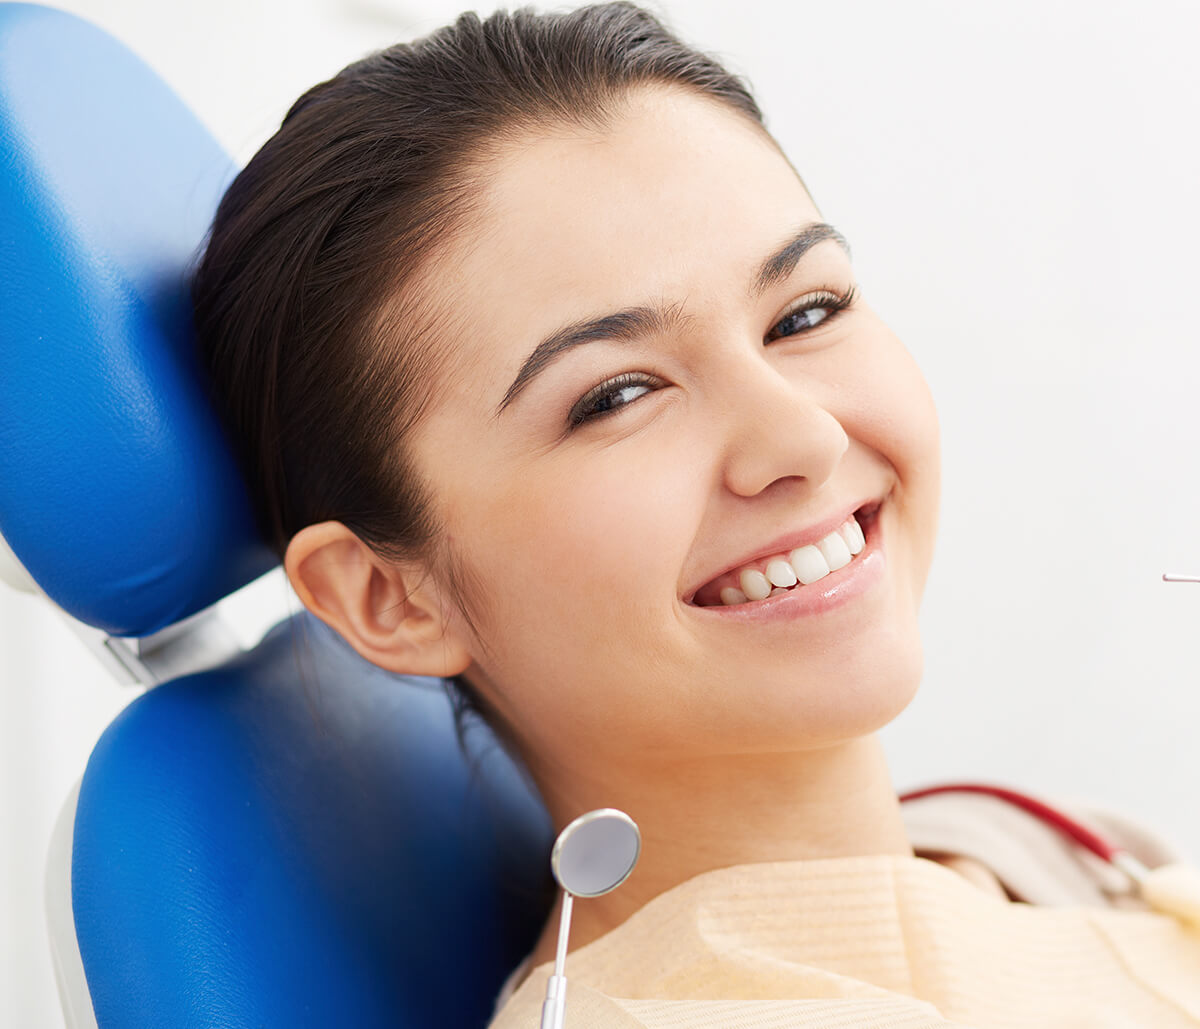 Abscessed Tooth? Relieve Pain Quickly Through Root Canal Therapy